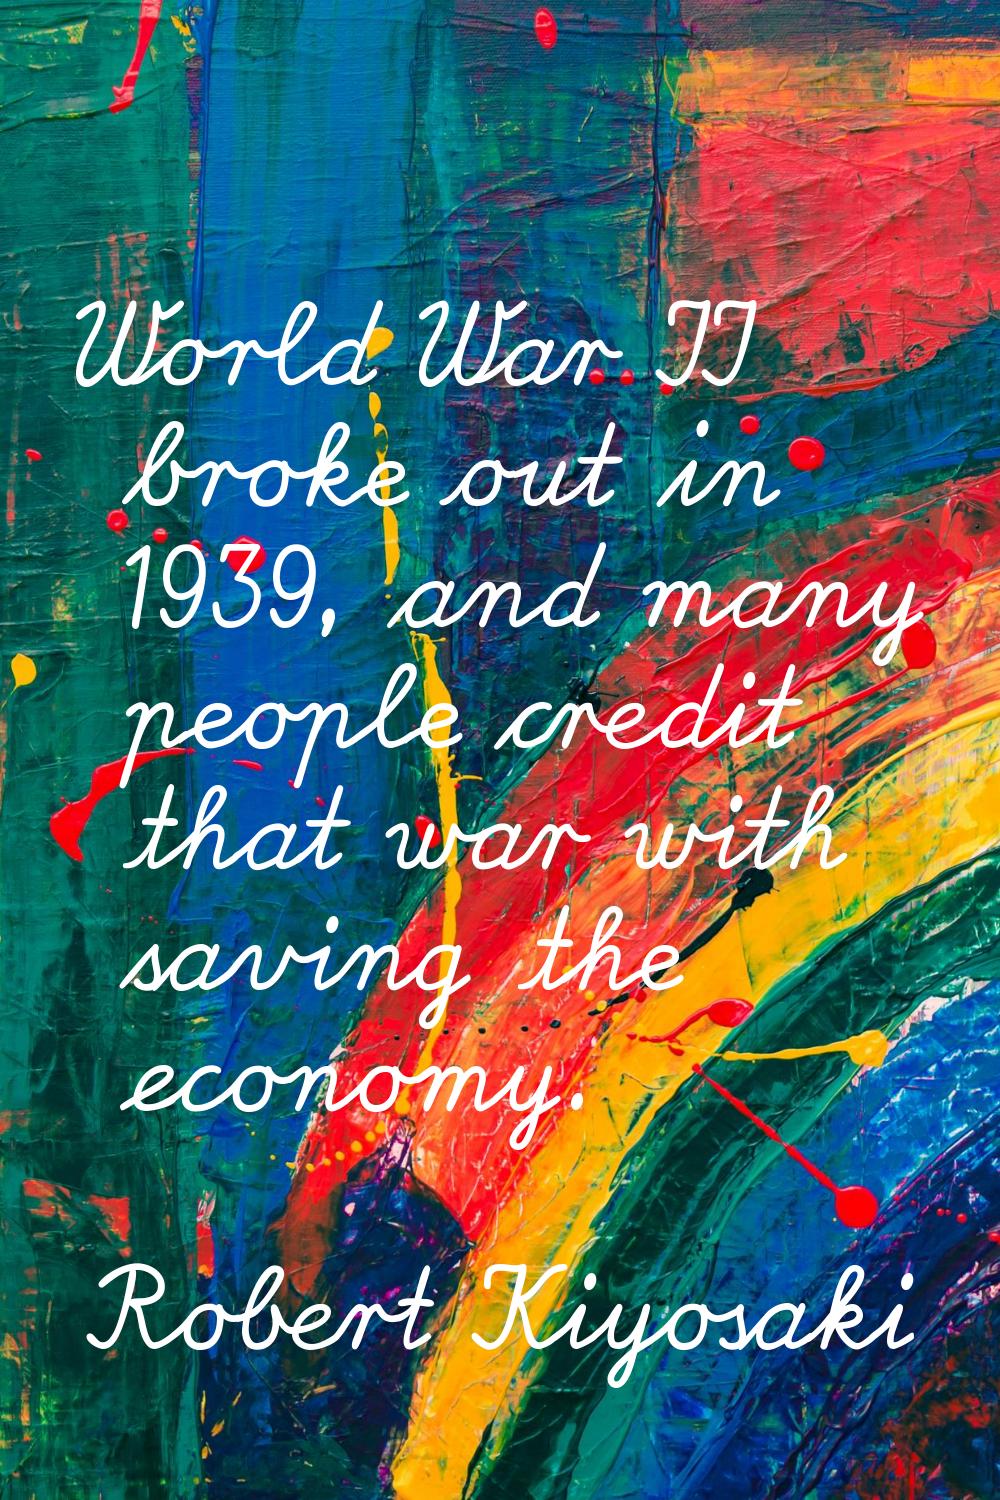 World War II broke out in 1939, and many people credit that war with saving the economy.